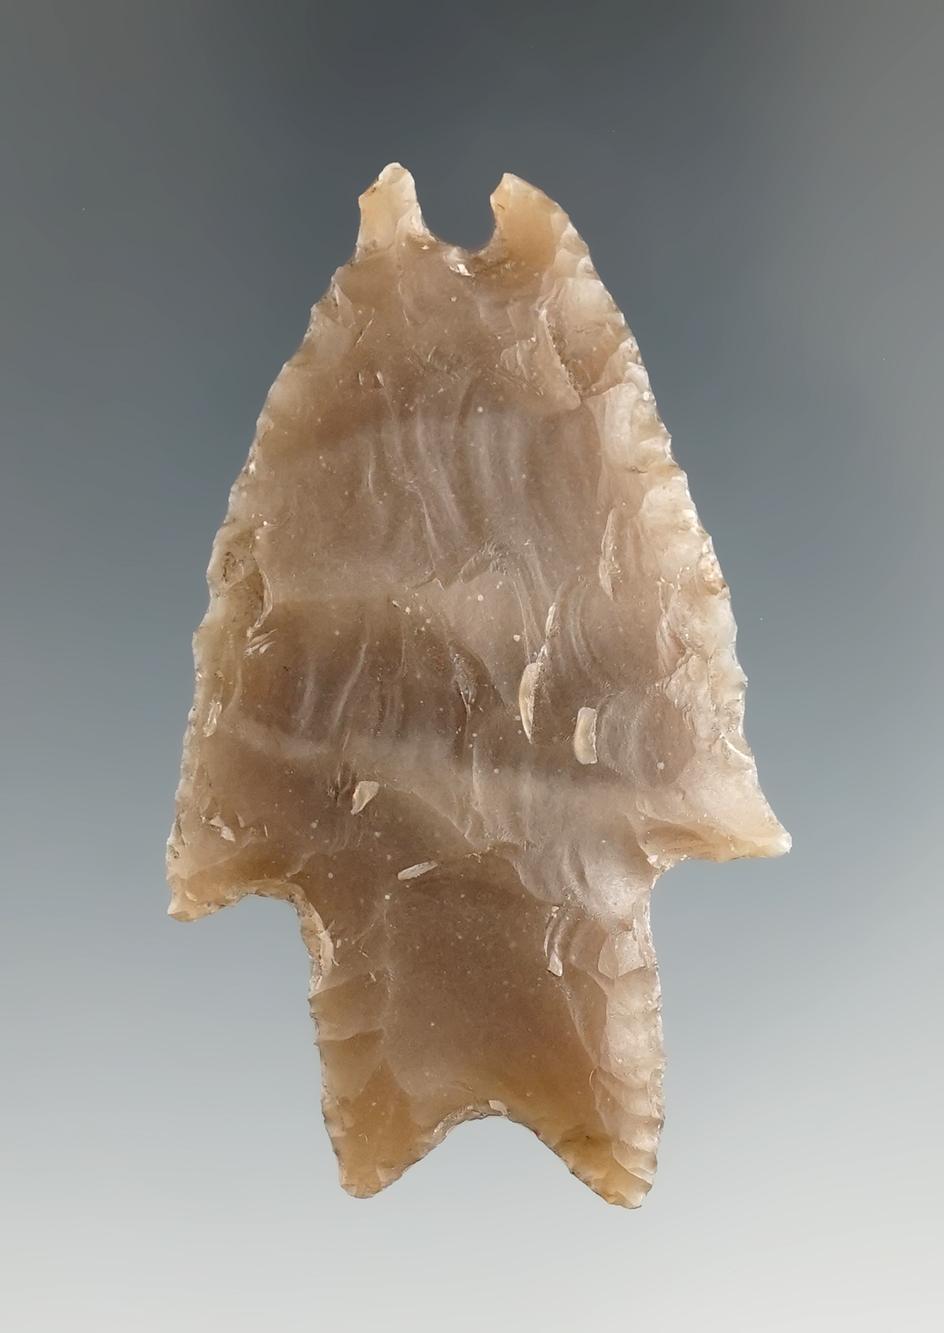 2 5/16" Double Tip Pedernales made from Edwards Plateau Chert, found in Kimble CO., Texas.